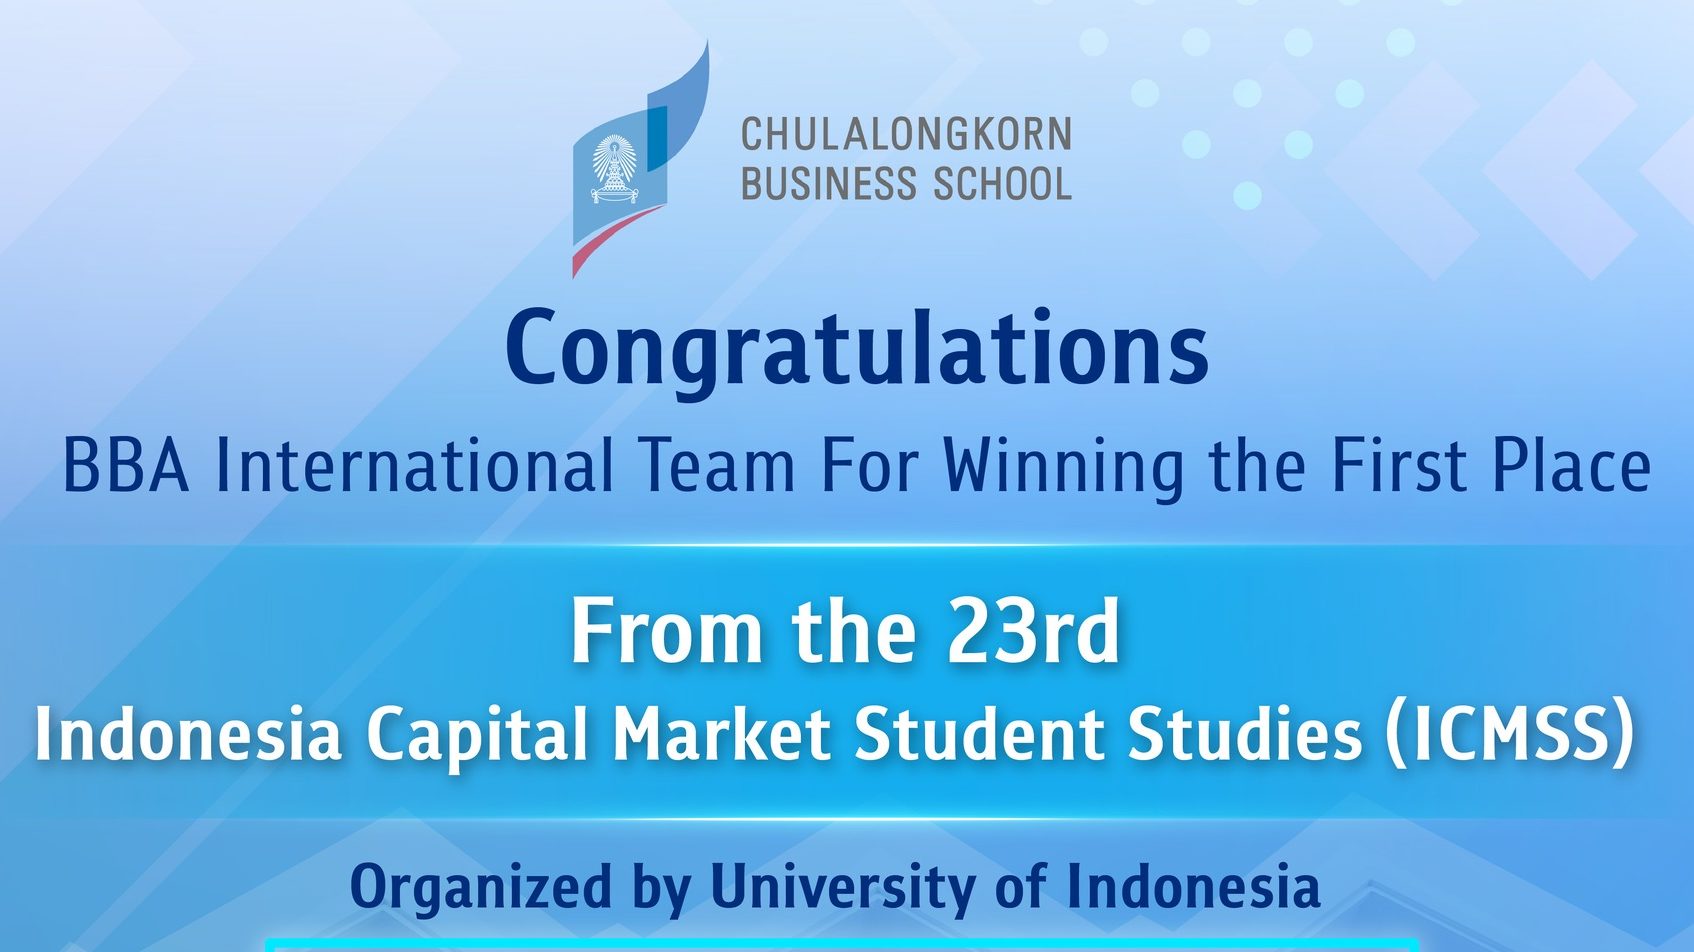 Congratulations to the BBA International Program students for their remarkable victory in the 23rd Indonesia Capital Market Student Studies (ICMSS)!